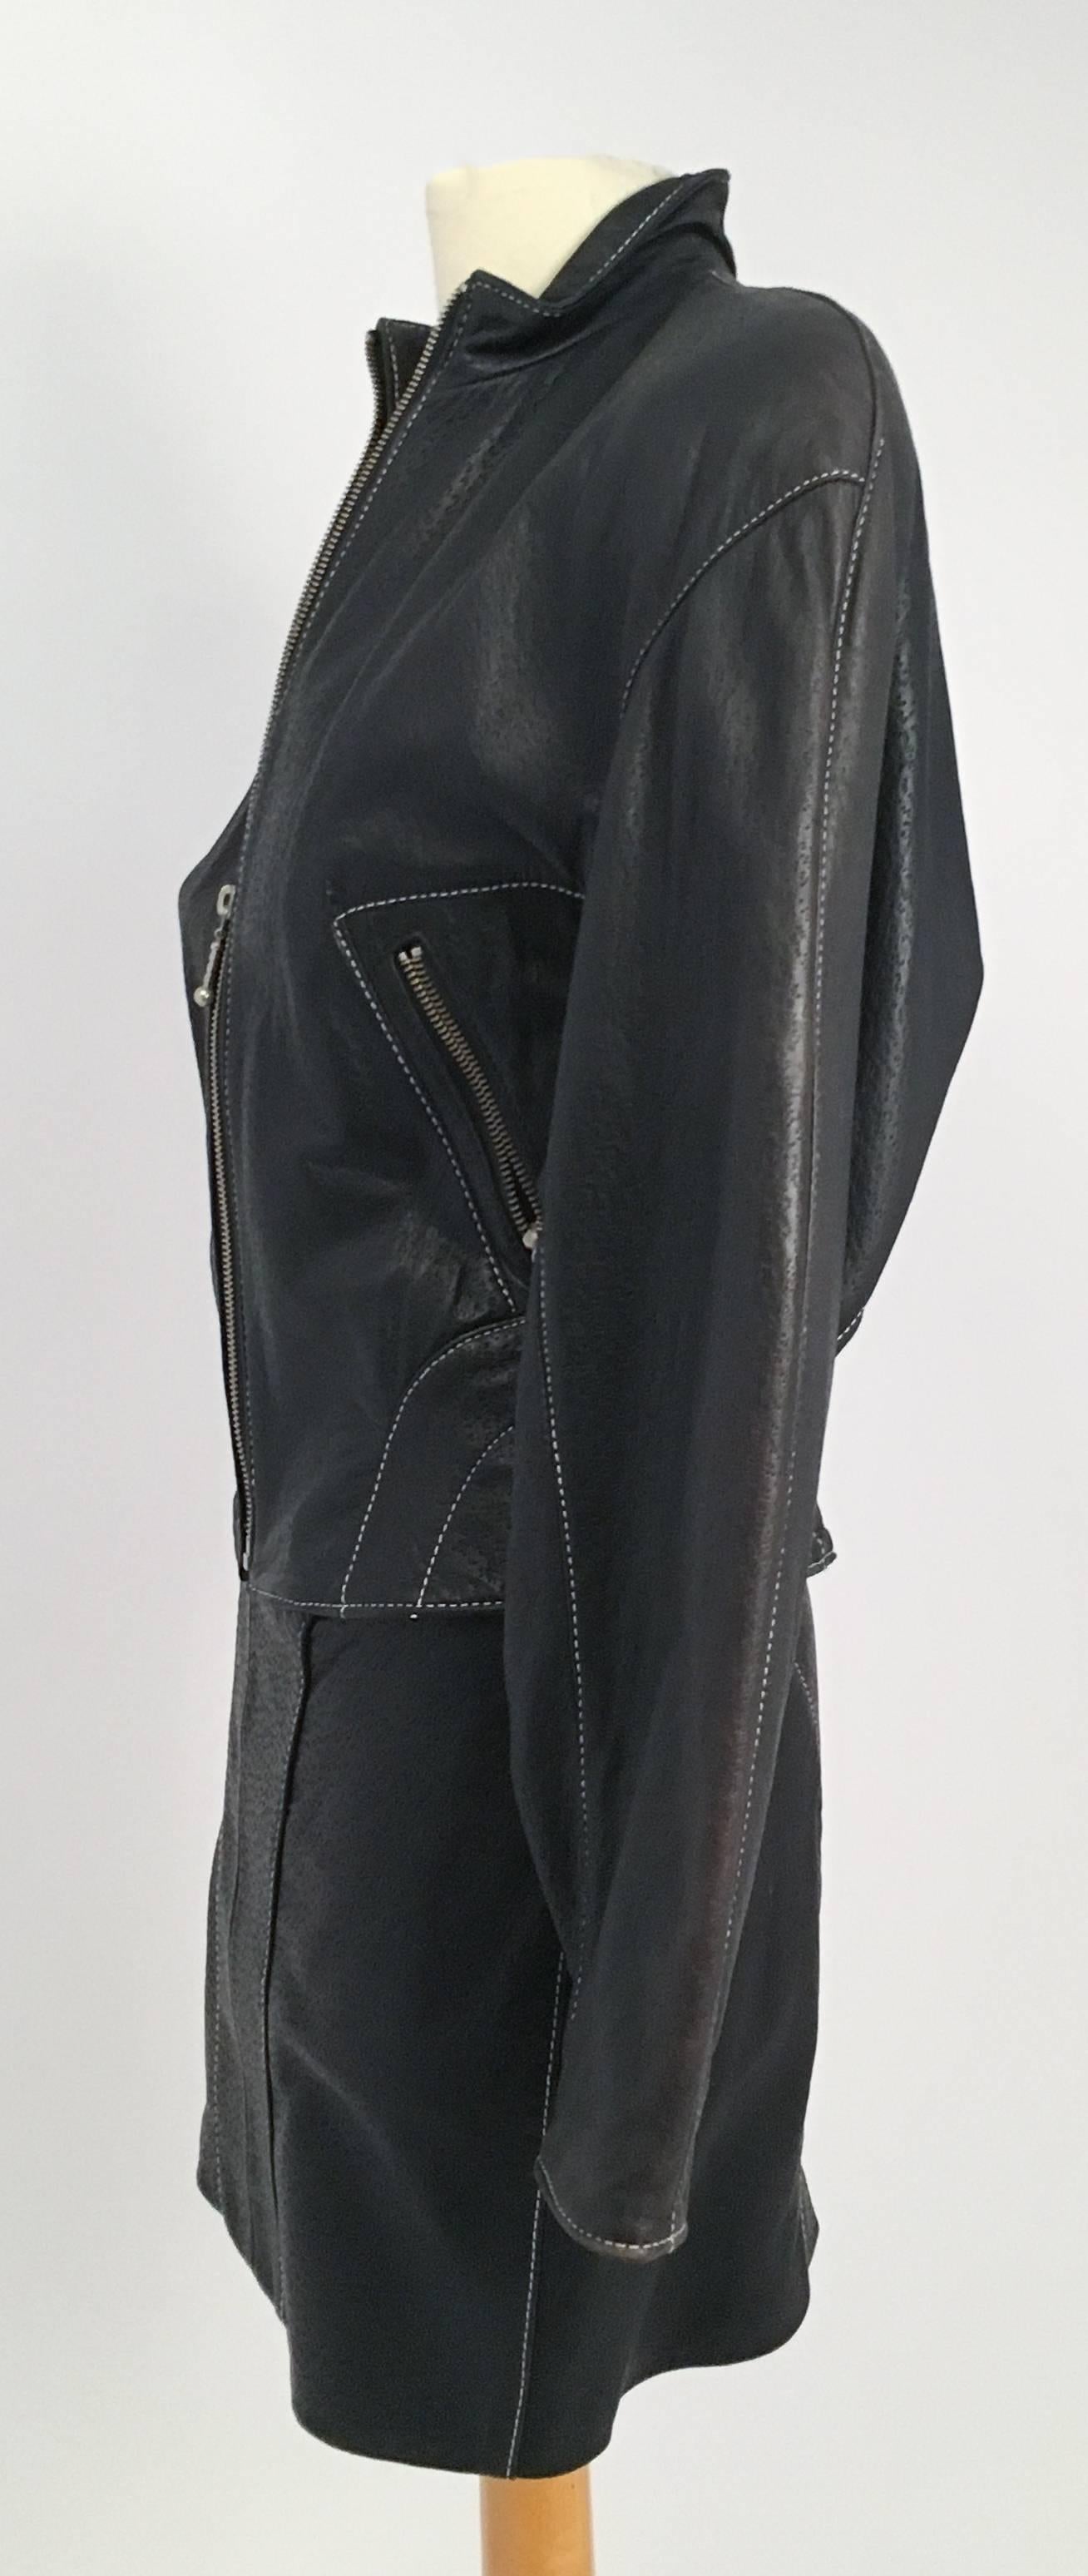 80s leather outfit